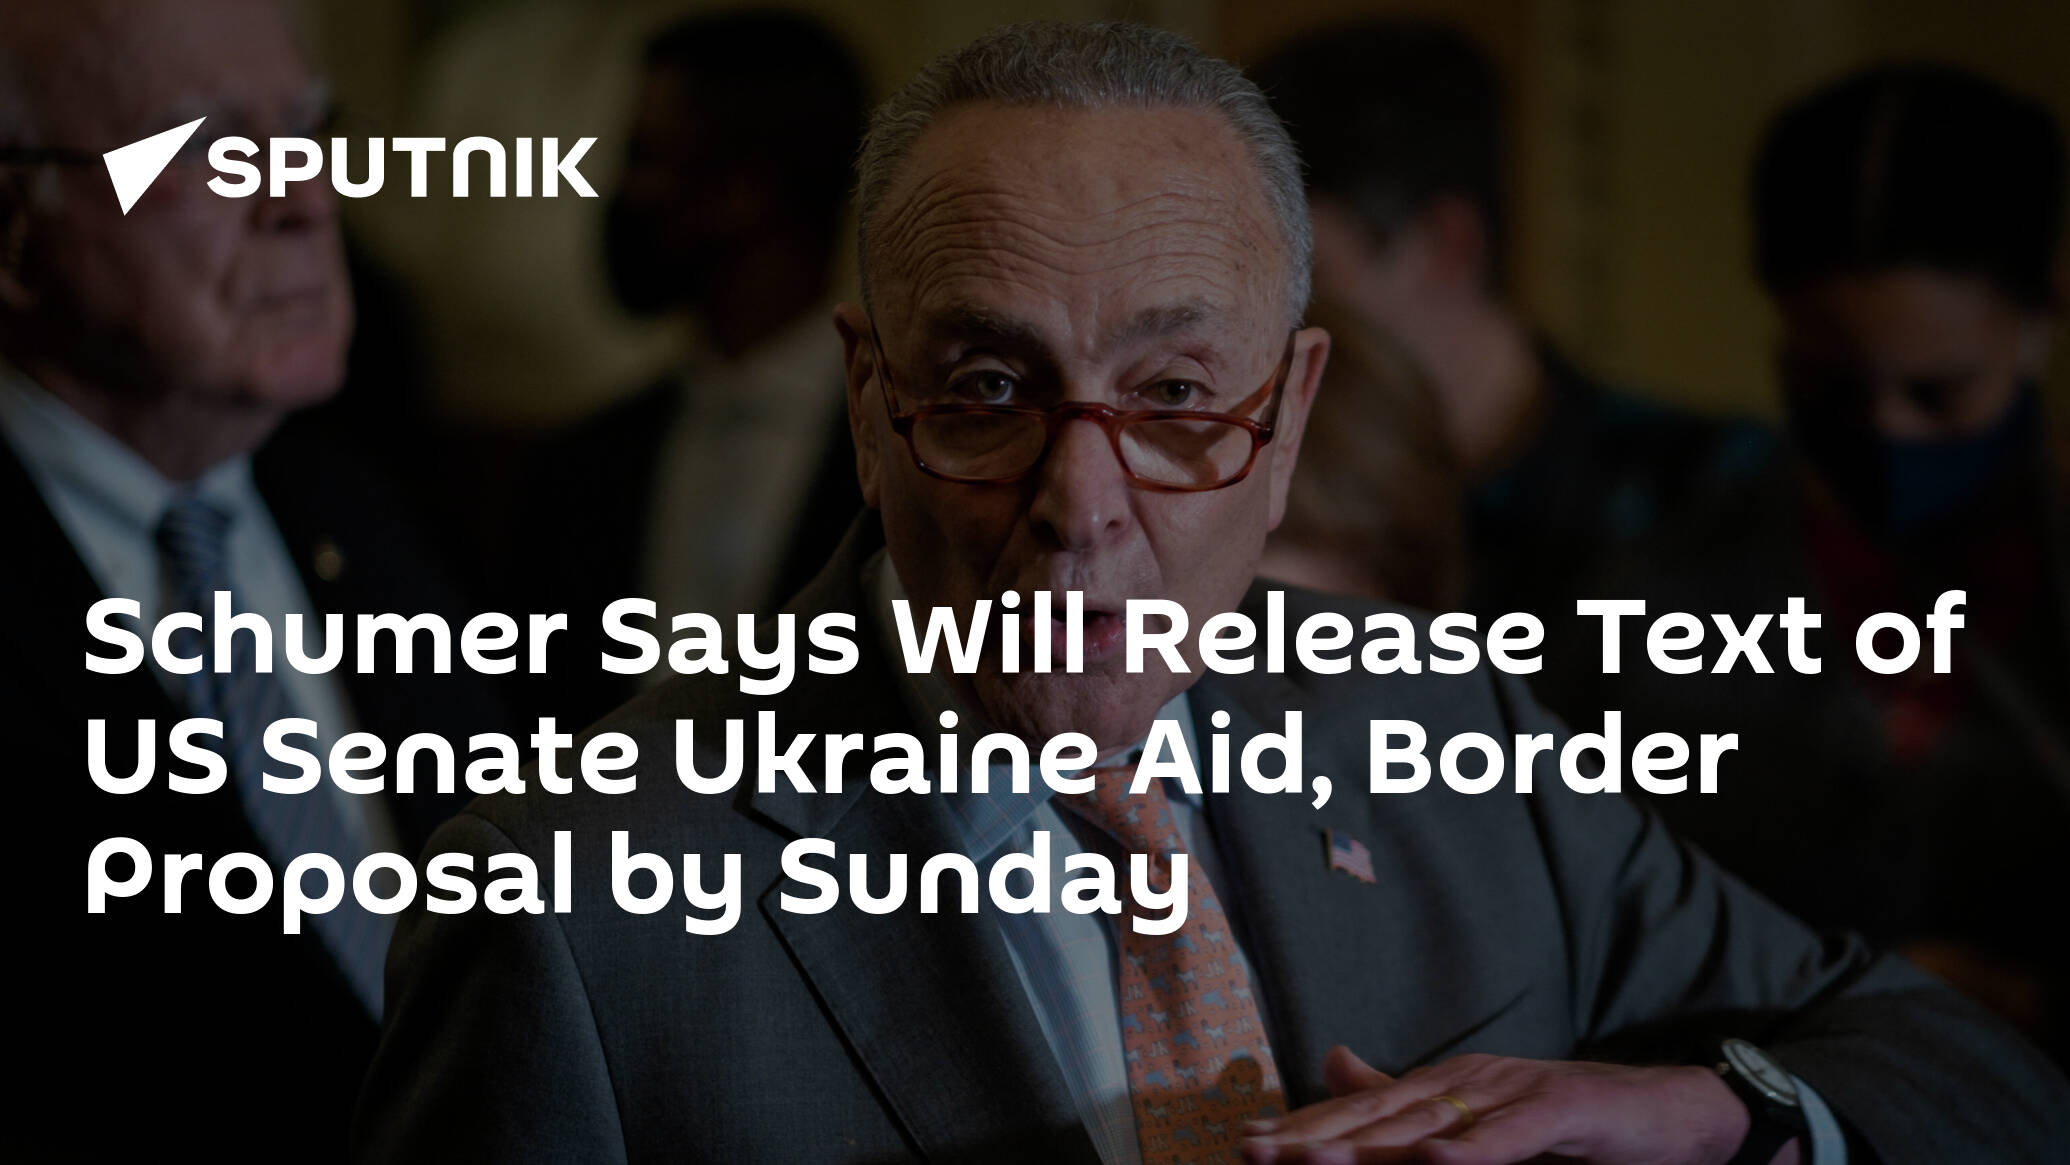 Schumer Says Will Release Text of US Senate Ukraine Aid, Border Proposal by Sunday